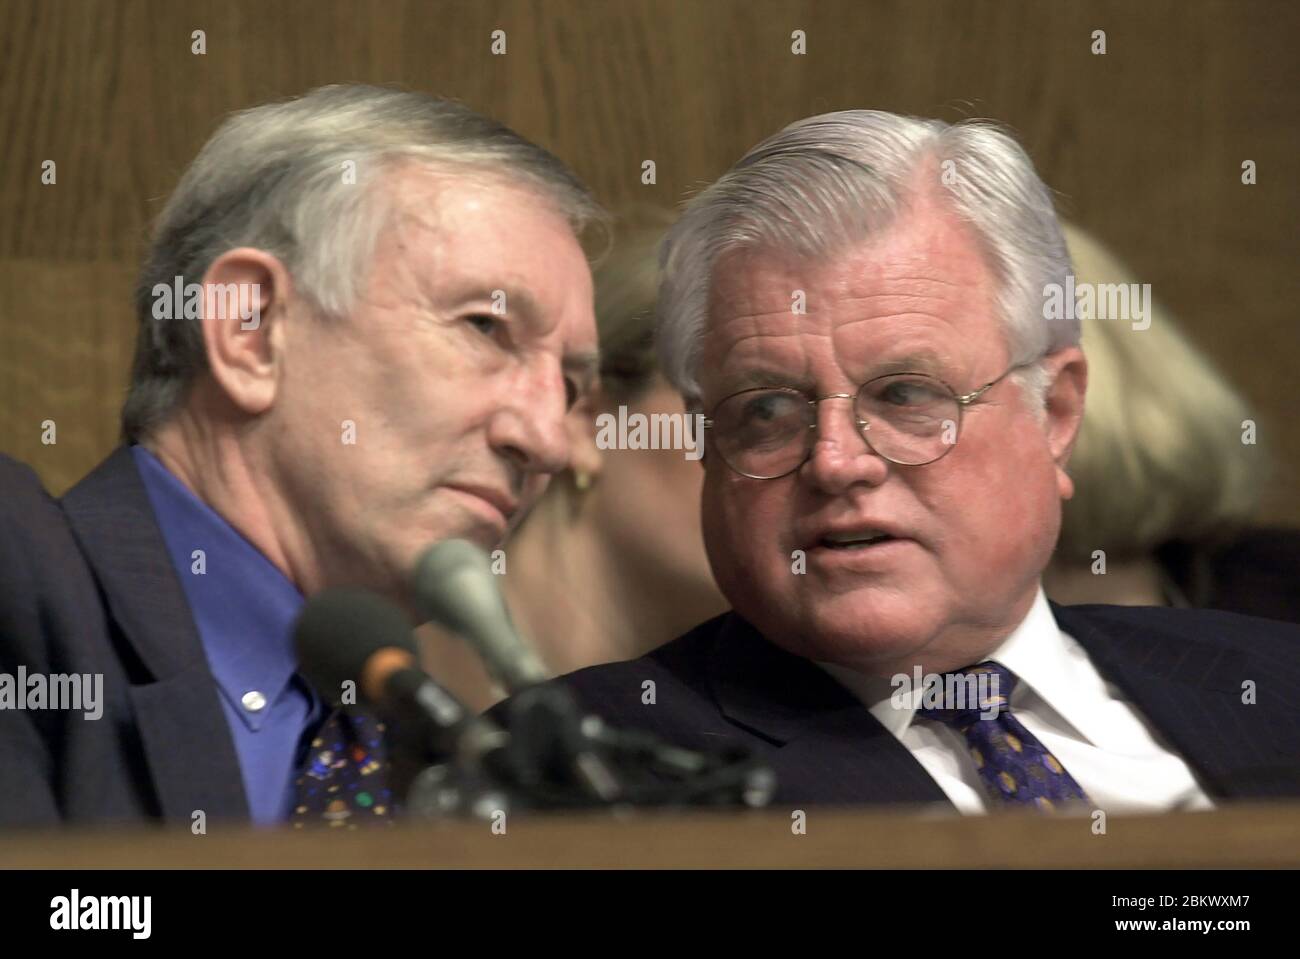 In this file photo from January 10, 2001, United States Senator James Jeffords (Republican of Vermont) and US Senator Ted Kennedy (Democrat of Massachusetts) discuss the confirmation of Rod Paige as Secretary of Education before the Senate Health, Education, Labor, and Pensions Committee.  Jeffords is rumored to be considering changing his party affiliation from Republican to Democrat which would result in the Democrats taking control of the Senate.  According to reports, Senator Kennedy has agreed to allow Jeffords to continue as committee chairman as part of the deal.Credit:  Ron Sachs / CNP Stock Photo